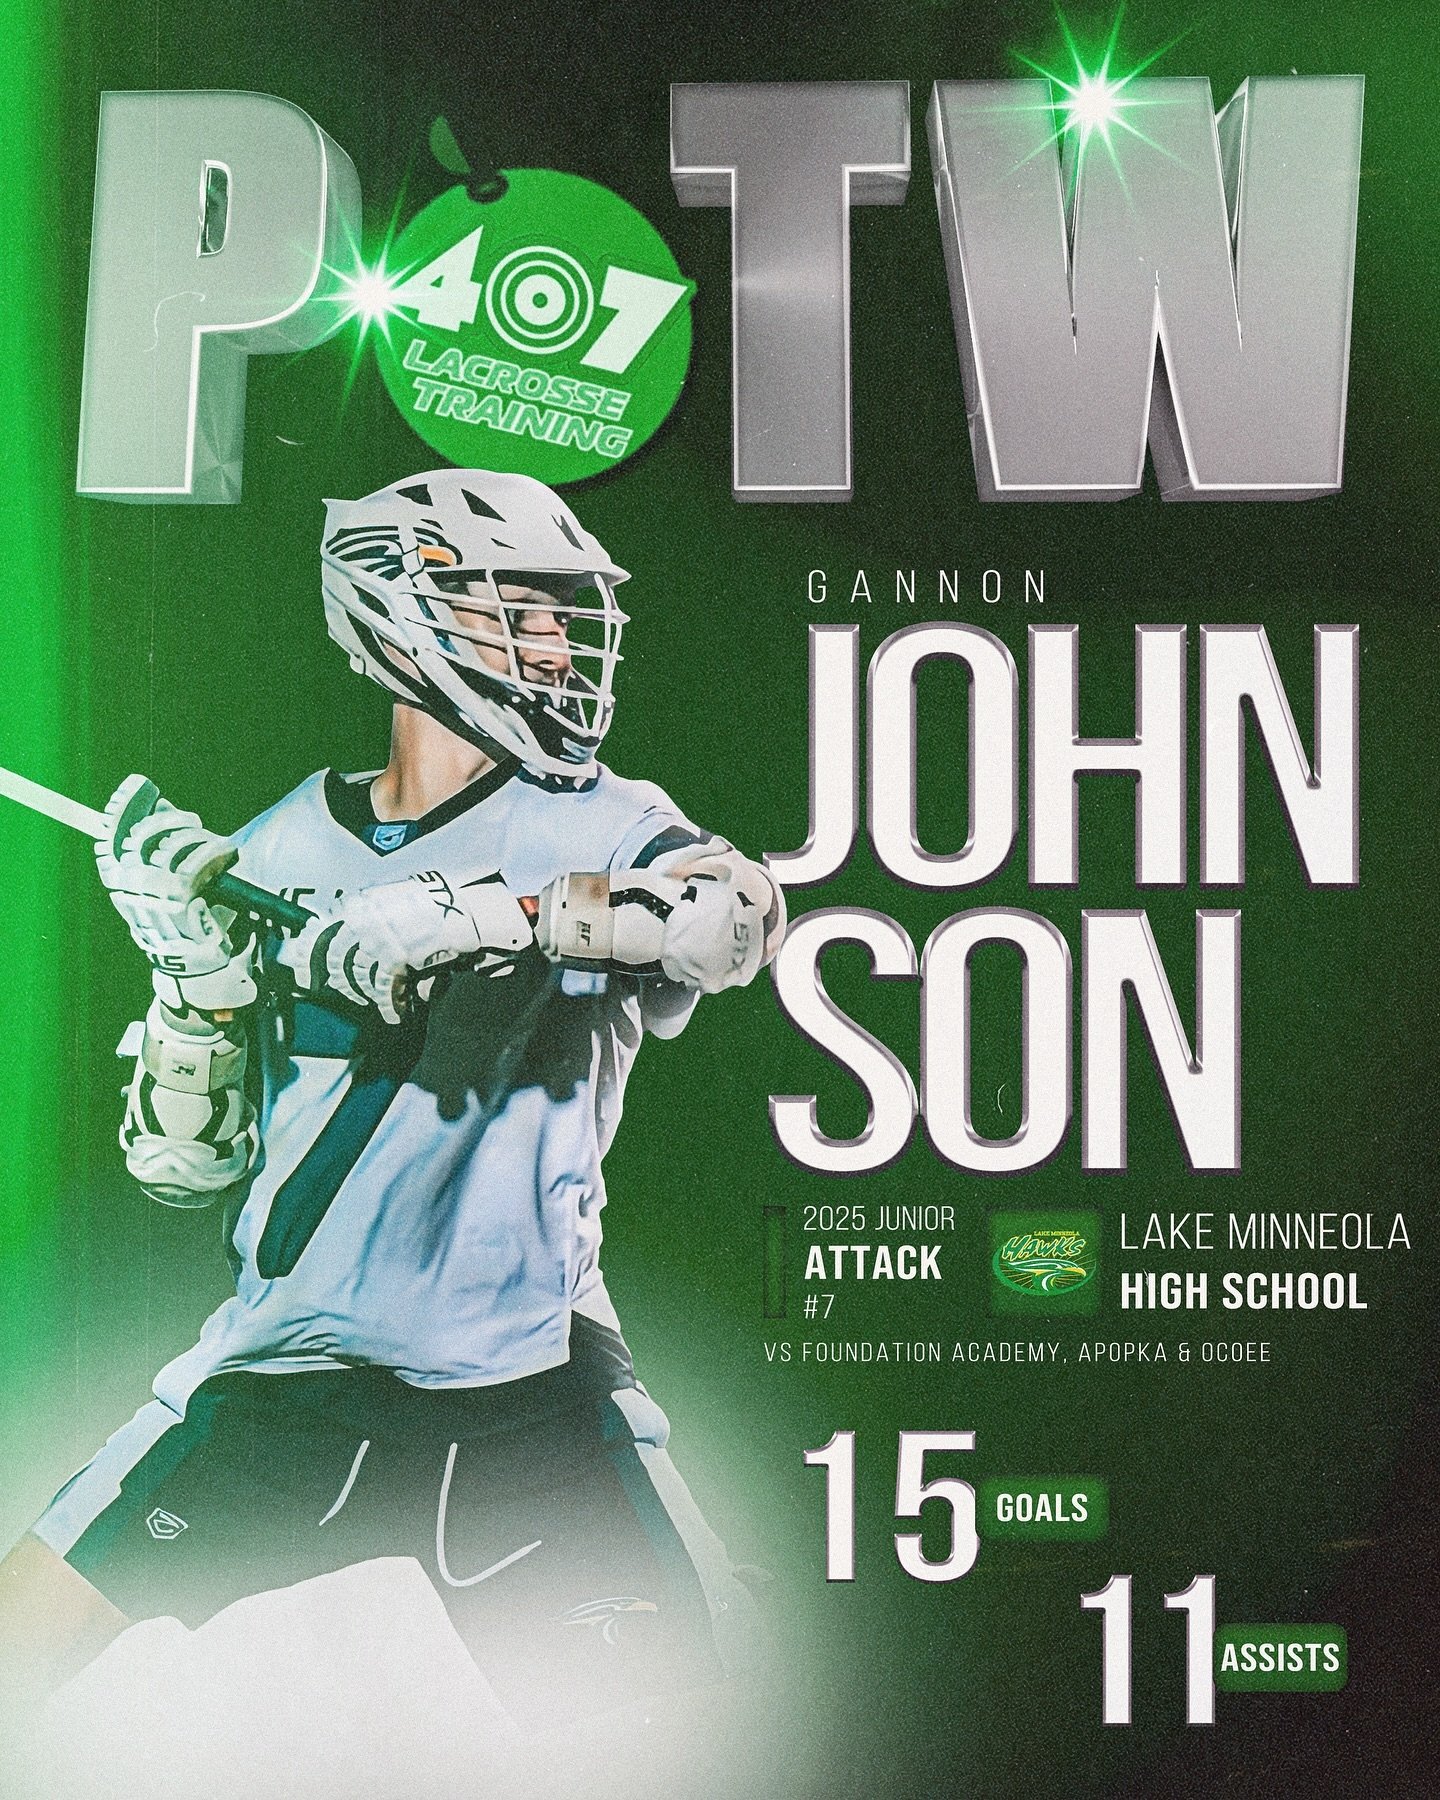 Congrats to @gannonjohnson_07 for earning this weeks&rsquo; HS POTW. Gannon had a massive week totaling 26 points in 3 games. Keep it up Gannon! 🍊 #407Lacrosse #OrlandoLacrosse #POTW